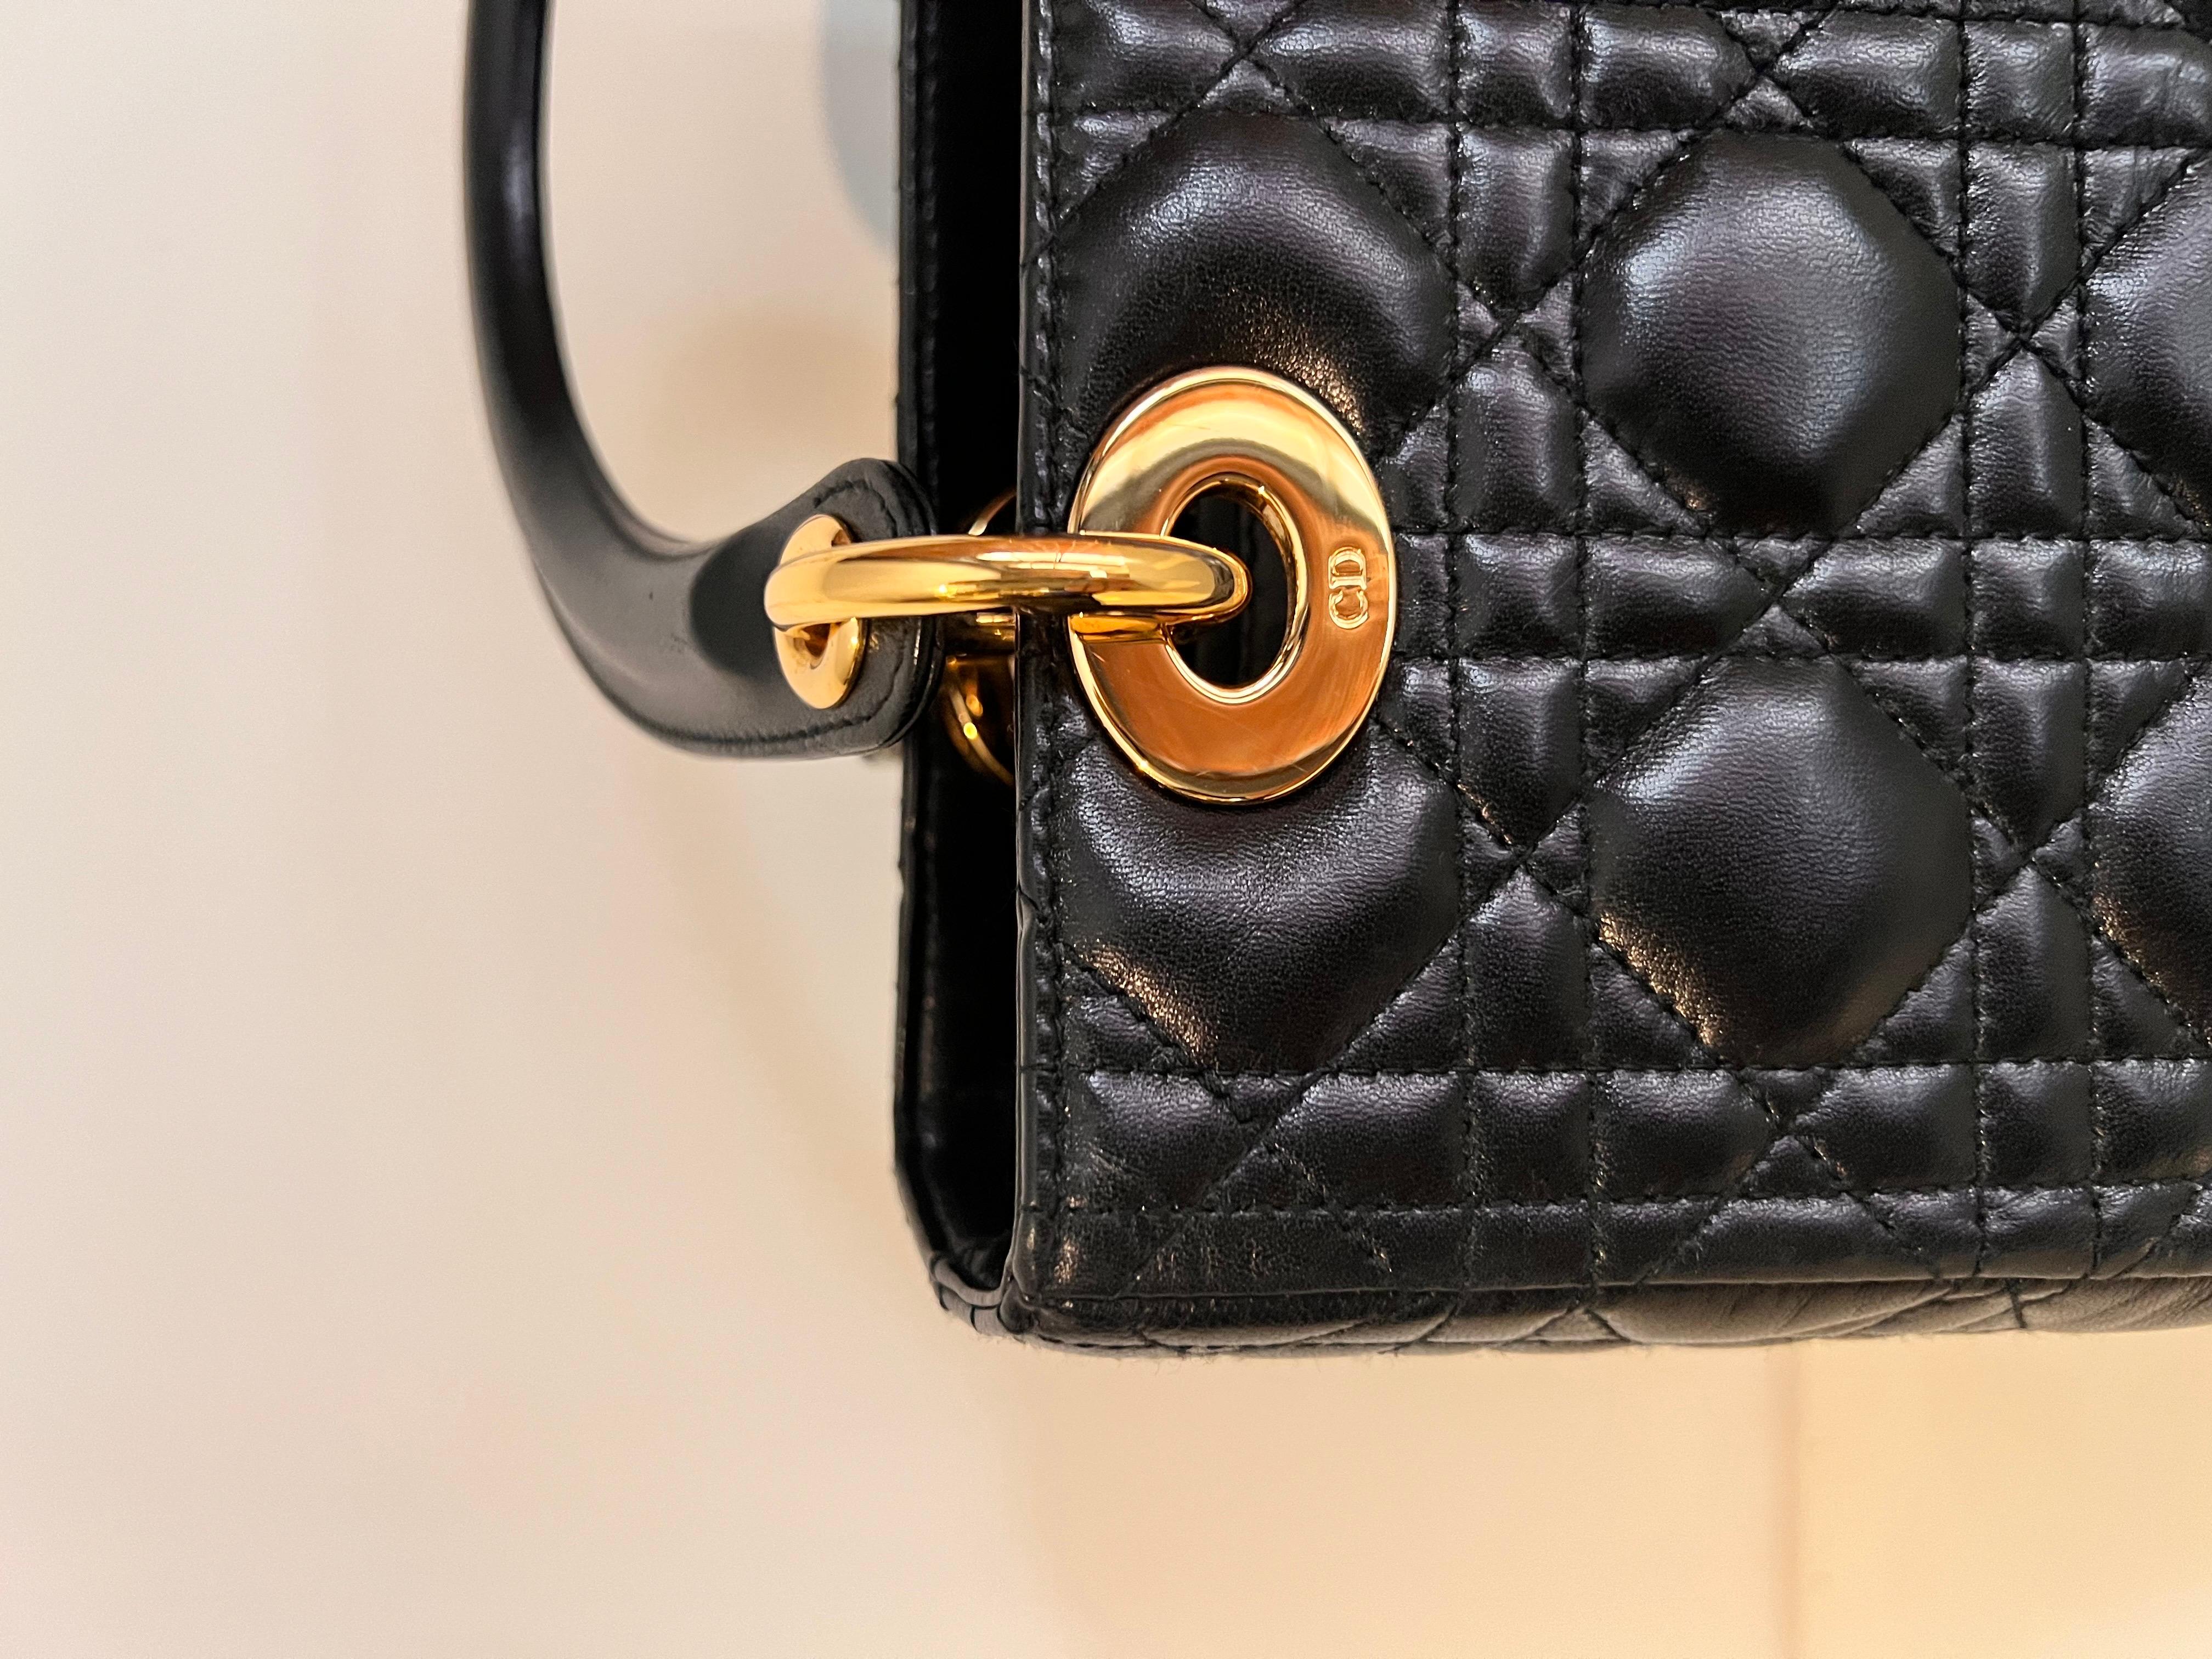 Lady DIOR quilted handbag with gold hardware, famously worn by Princess Diana  4